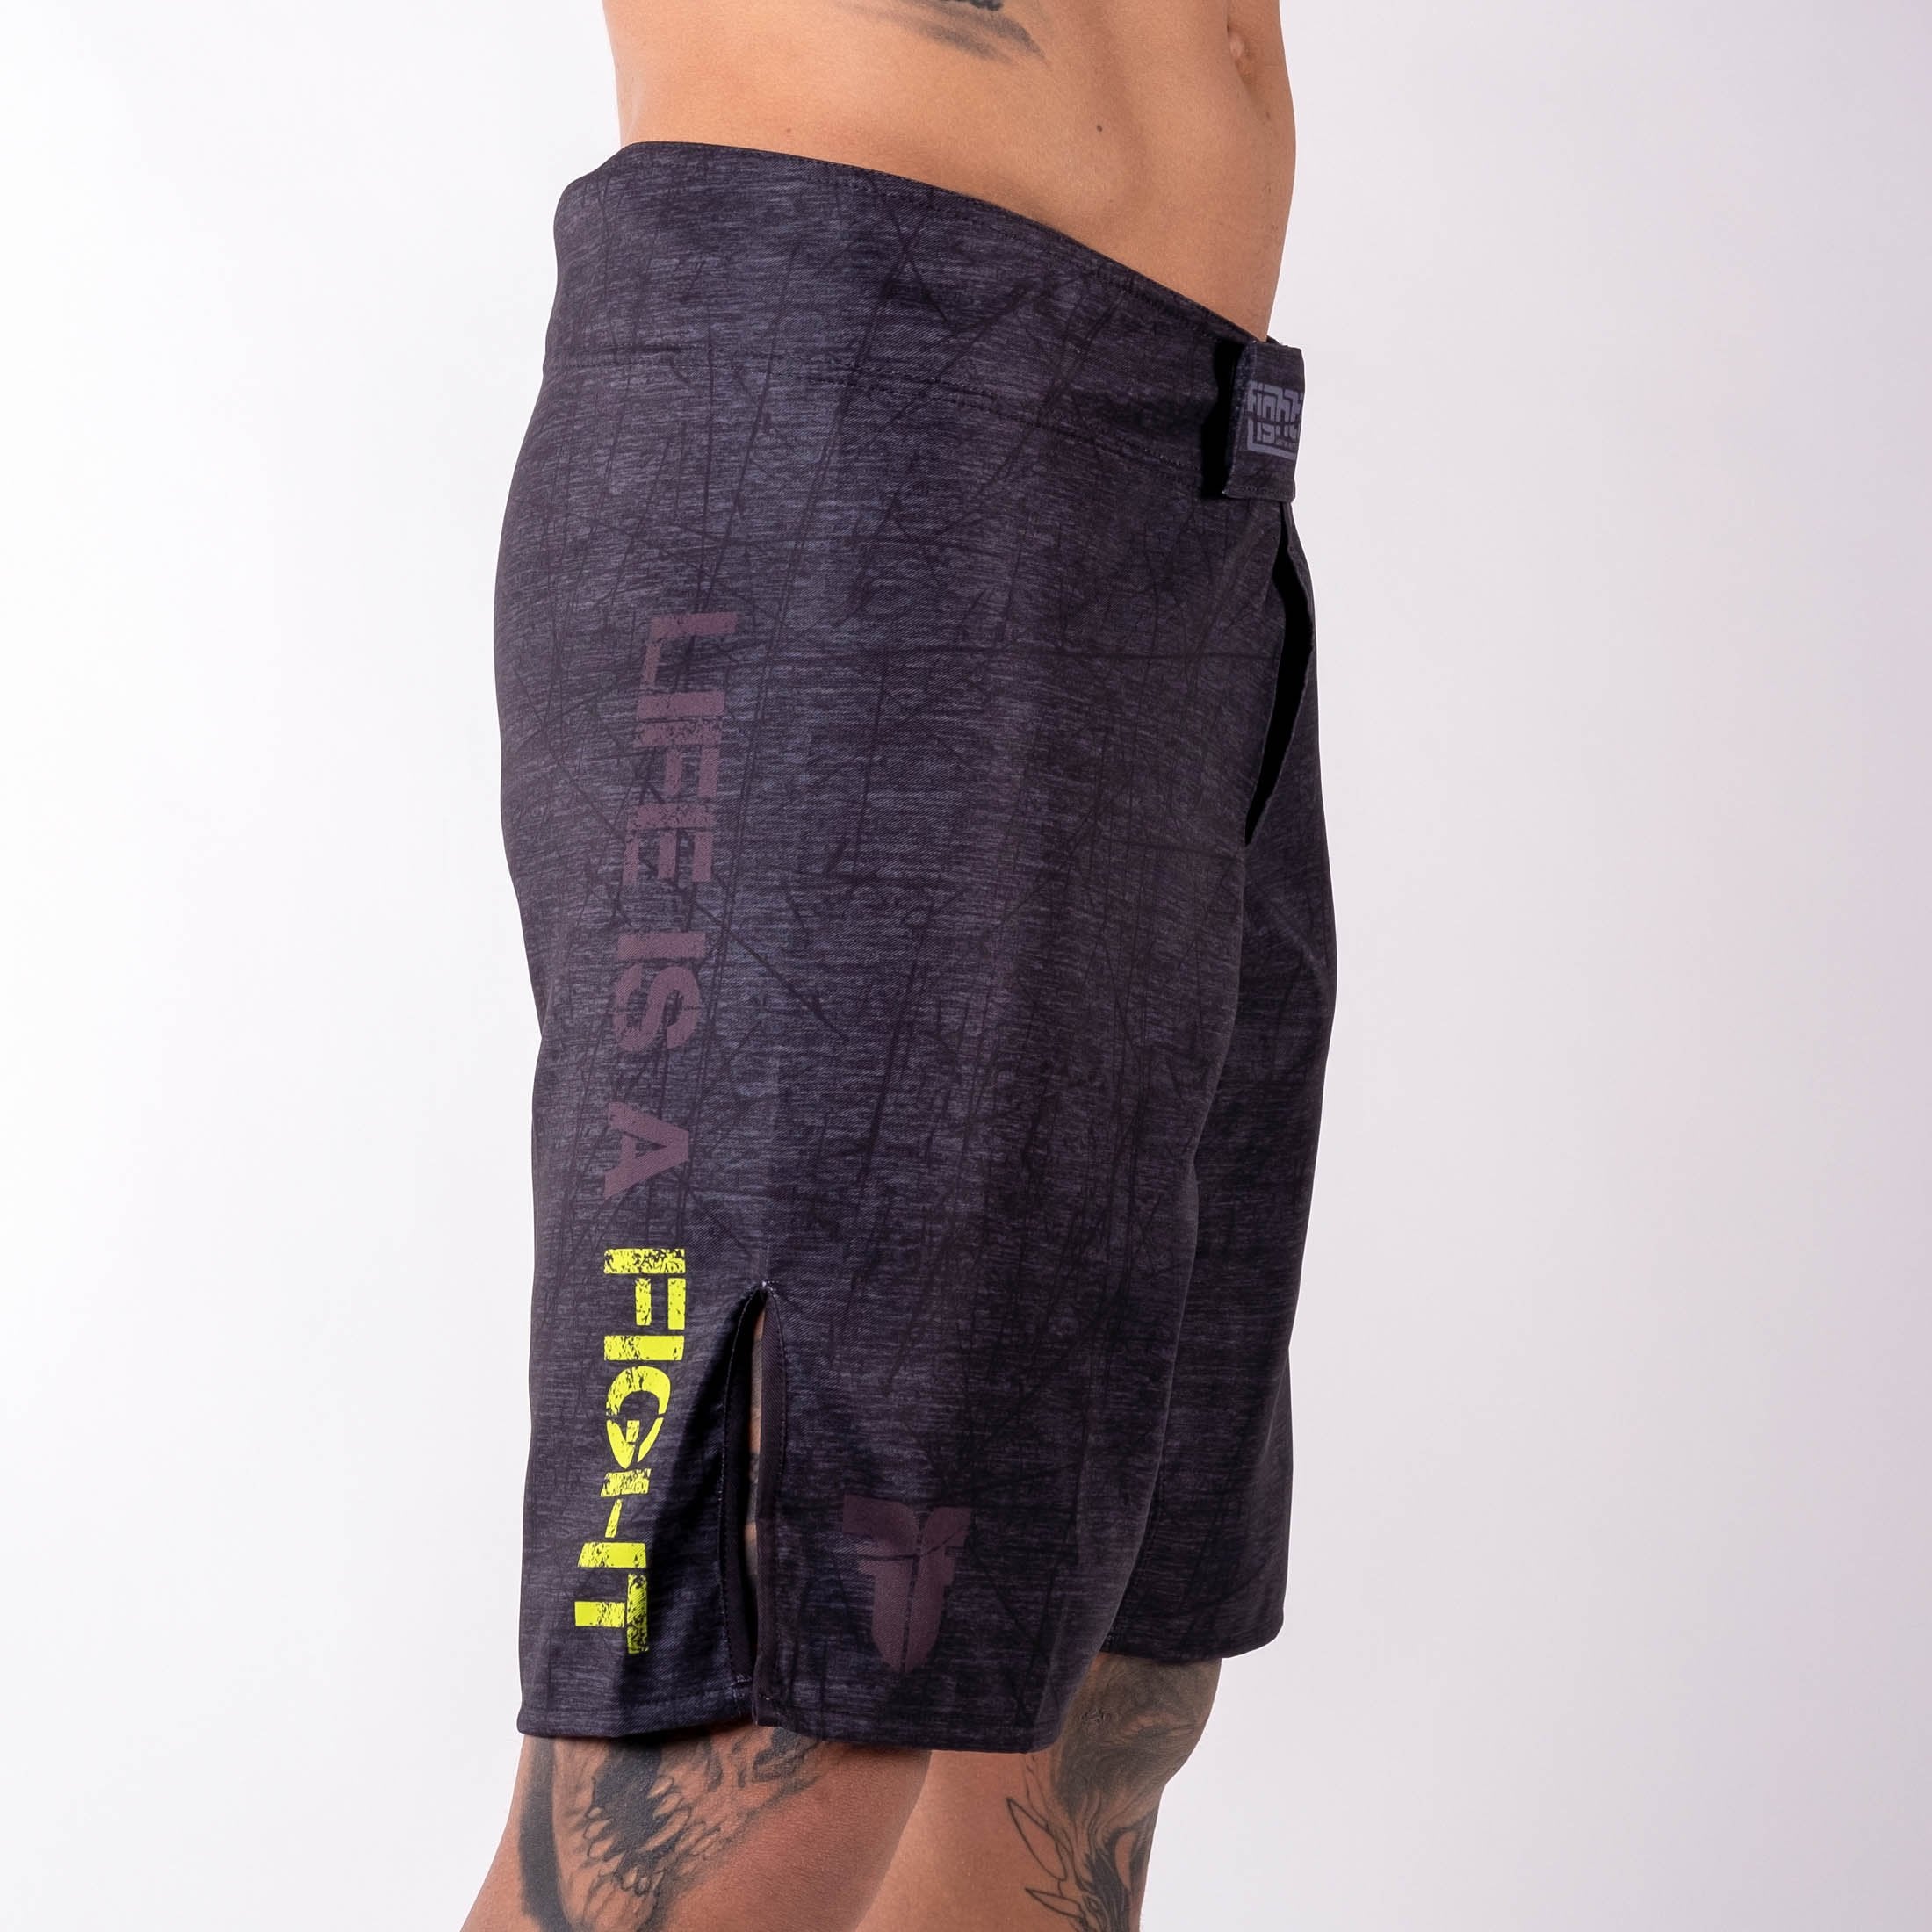 Fighter MMA Shorts - Life is a Fight - gray